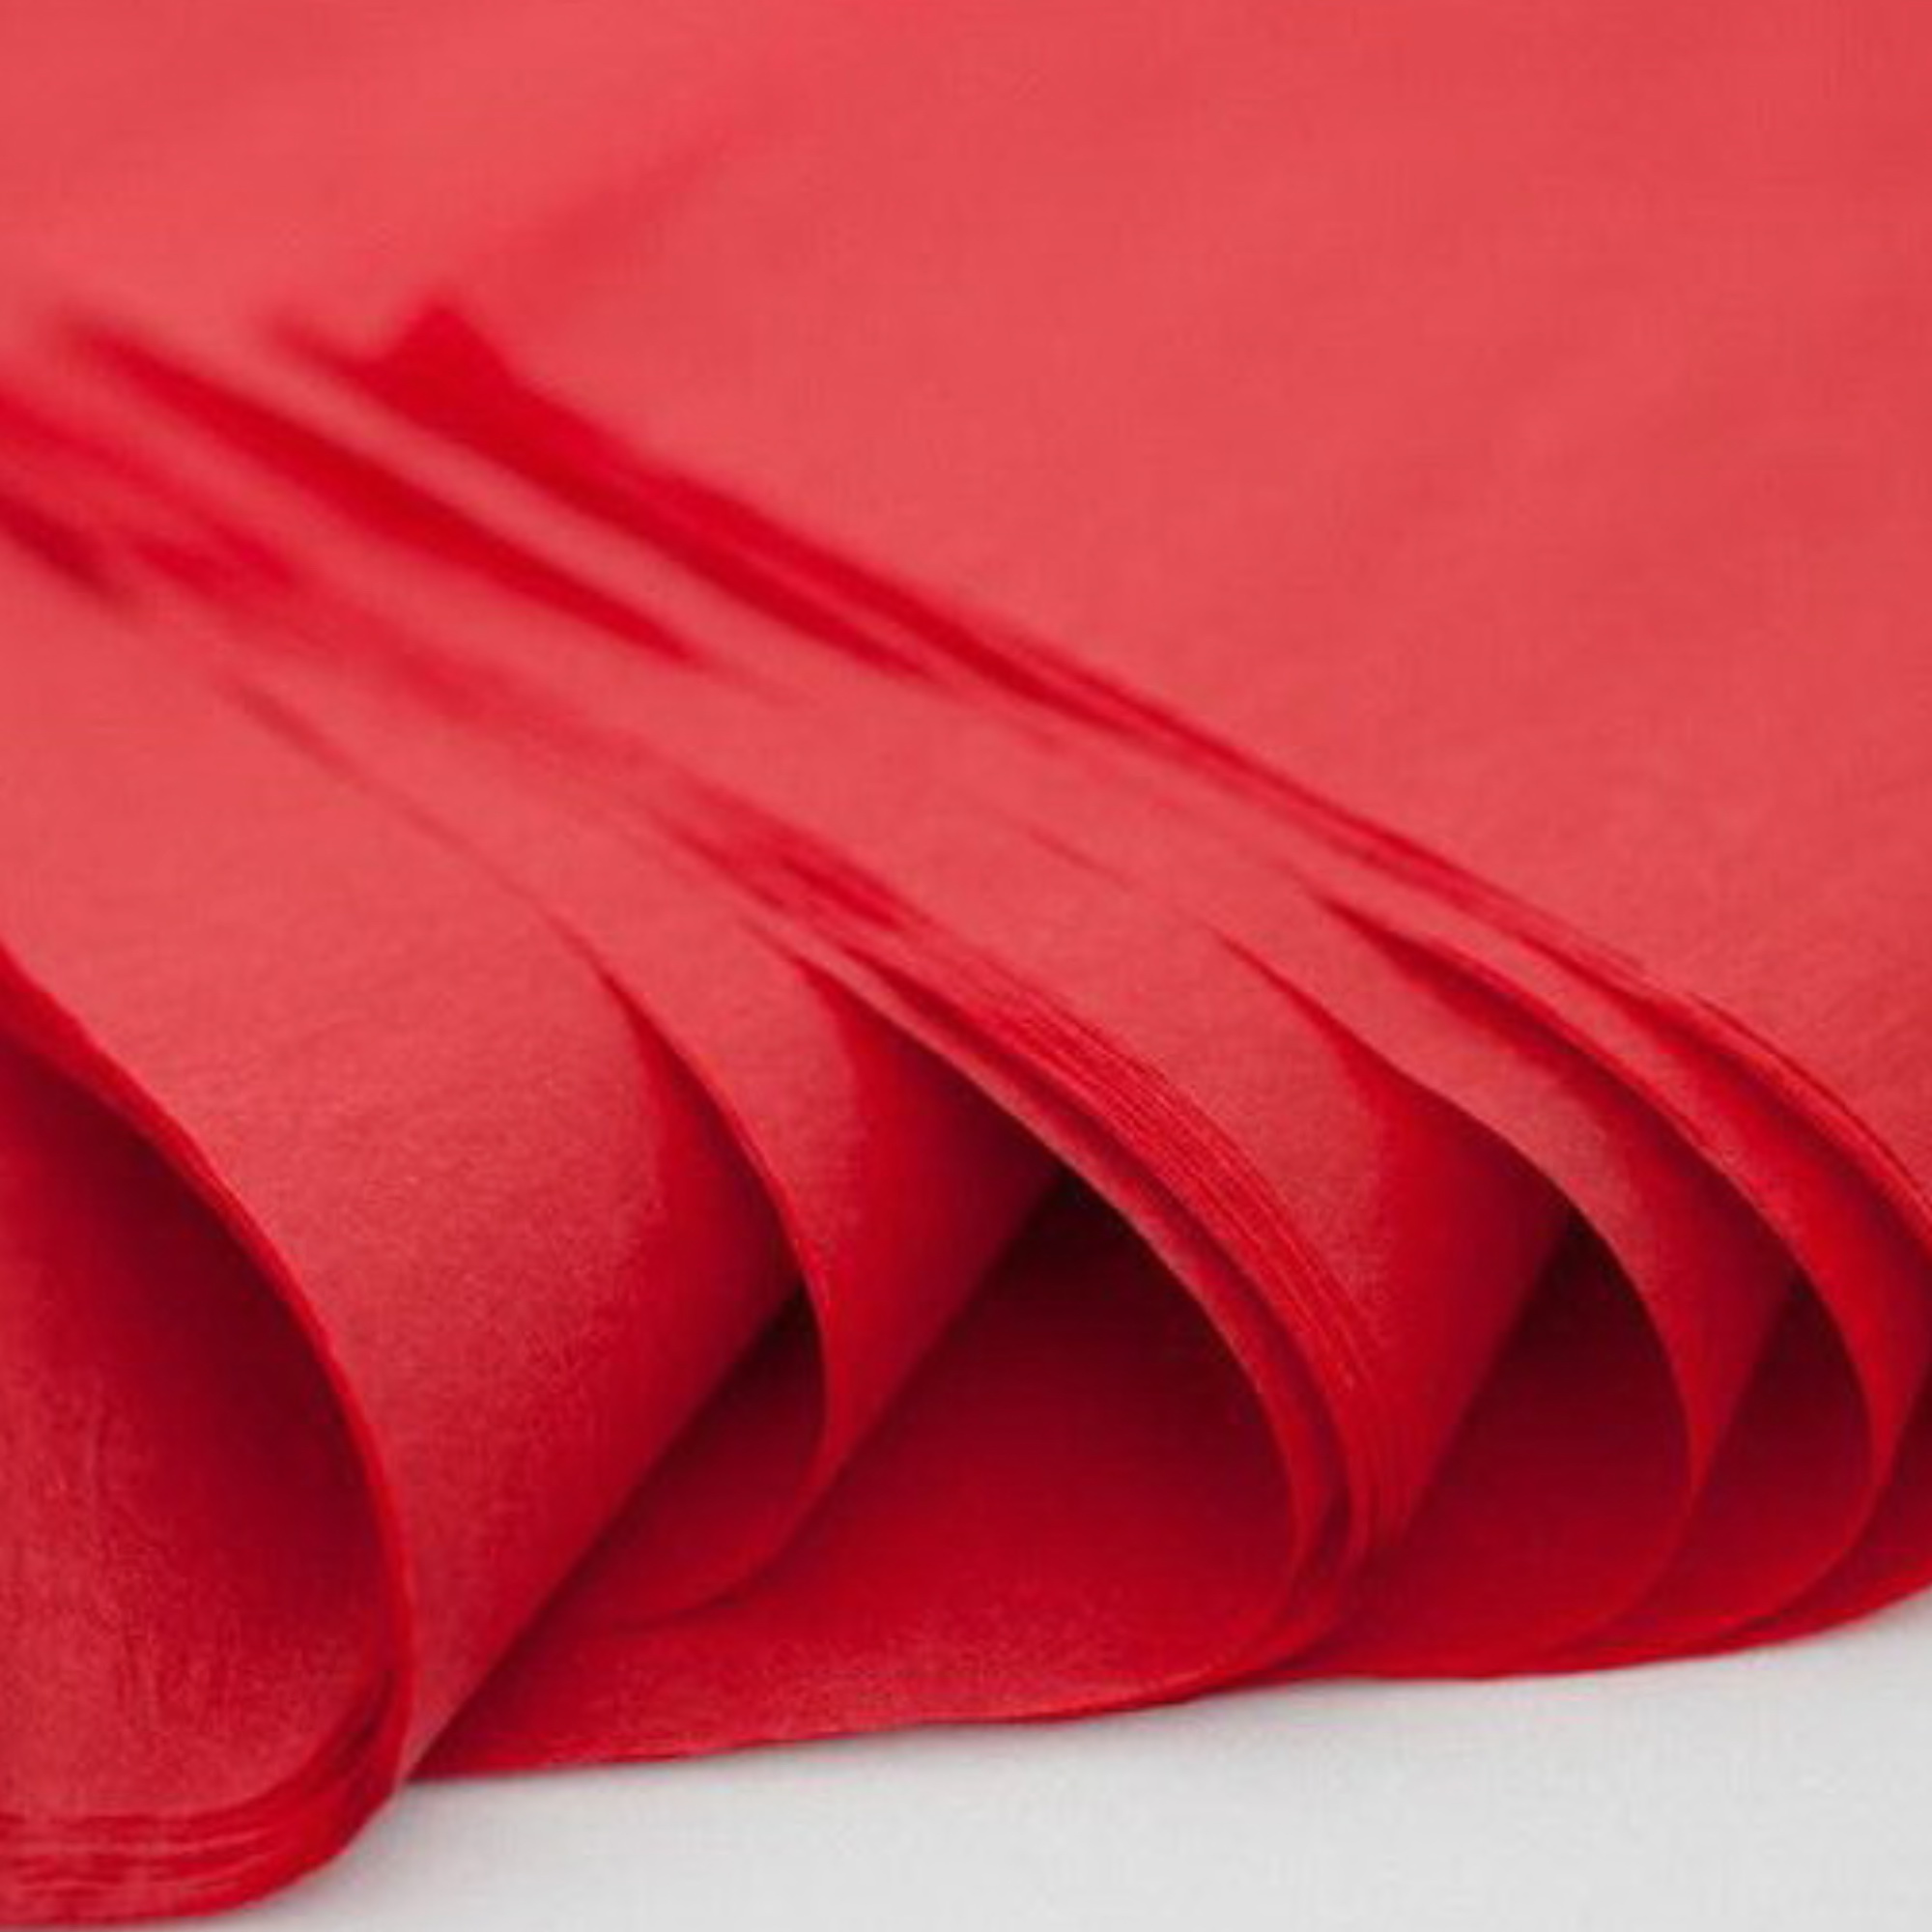 500 LARGE Sheets Of Acid Free Tissue Paper 500x750mm